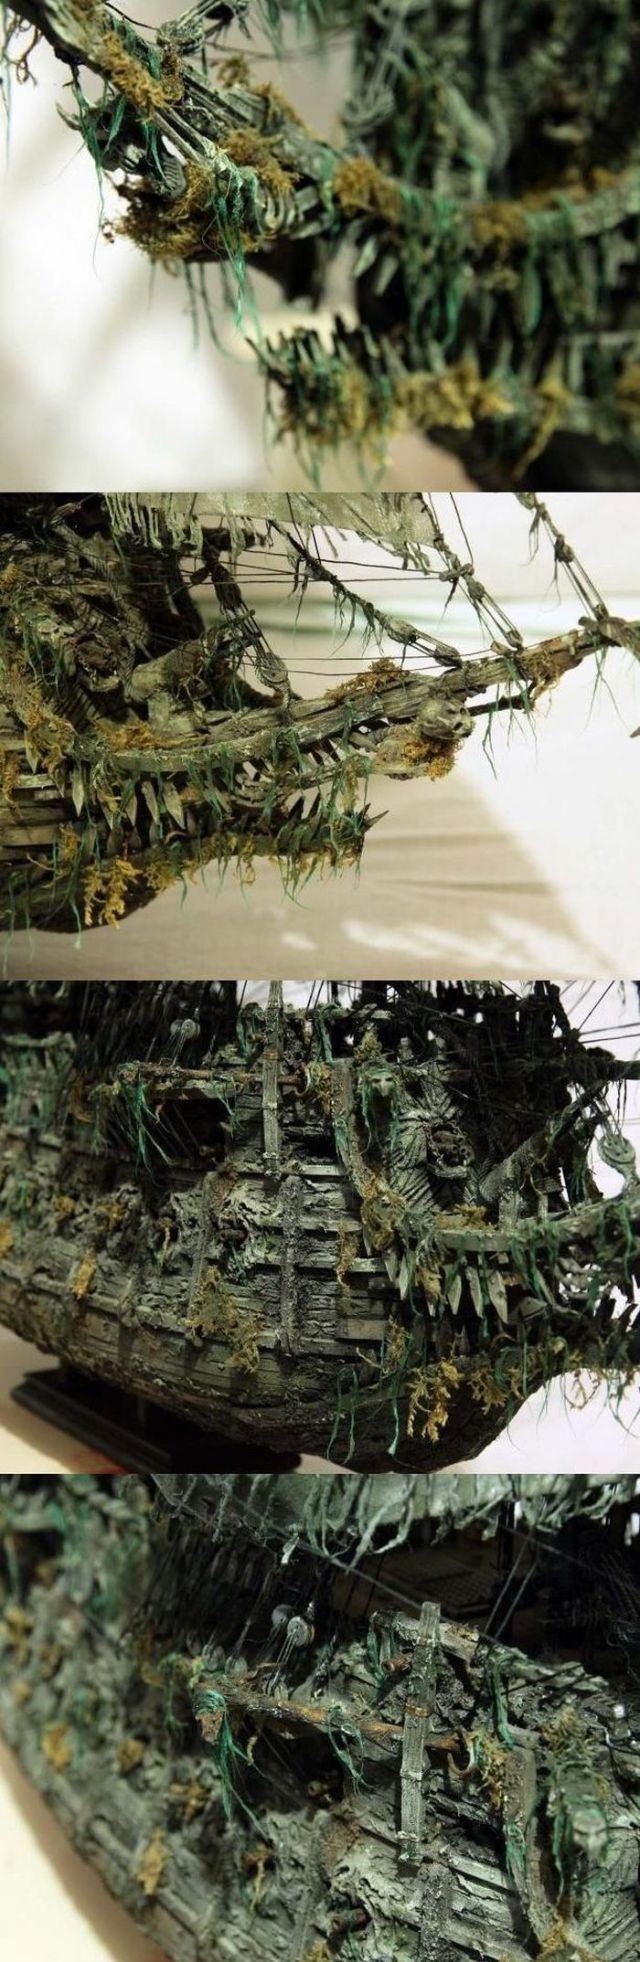 A Model Ship of The Flying Dutchman from Pirates of the Caribbean